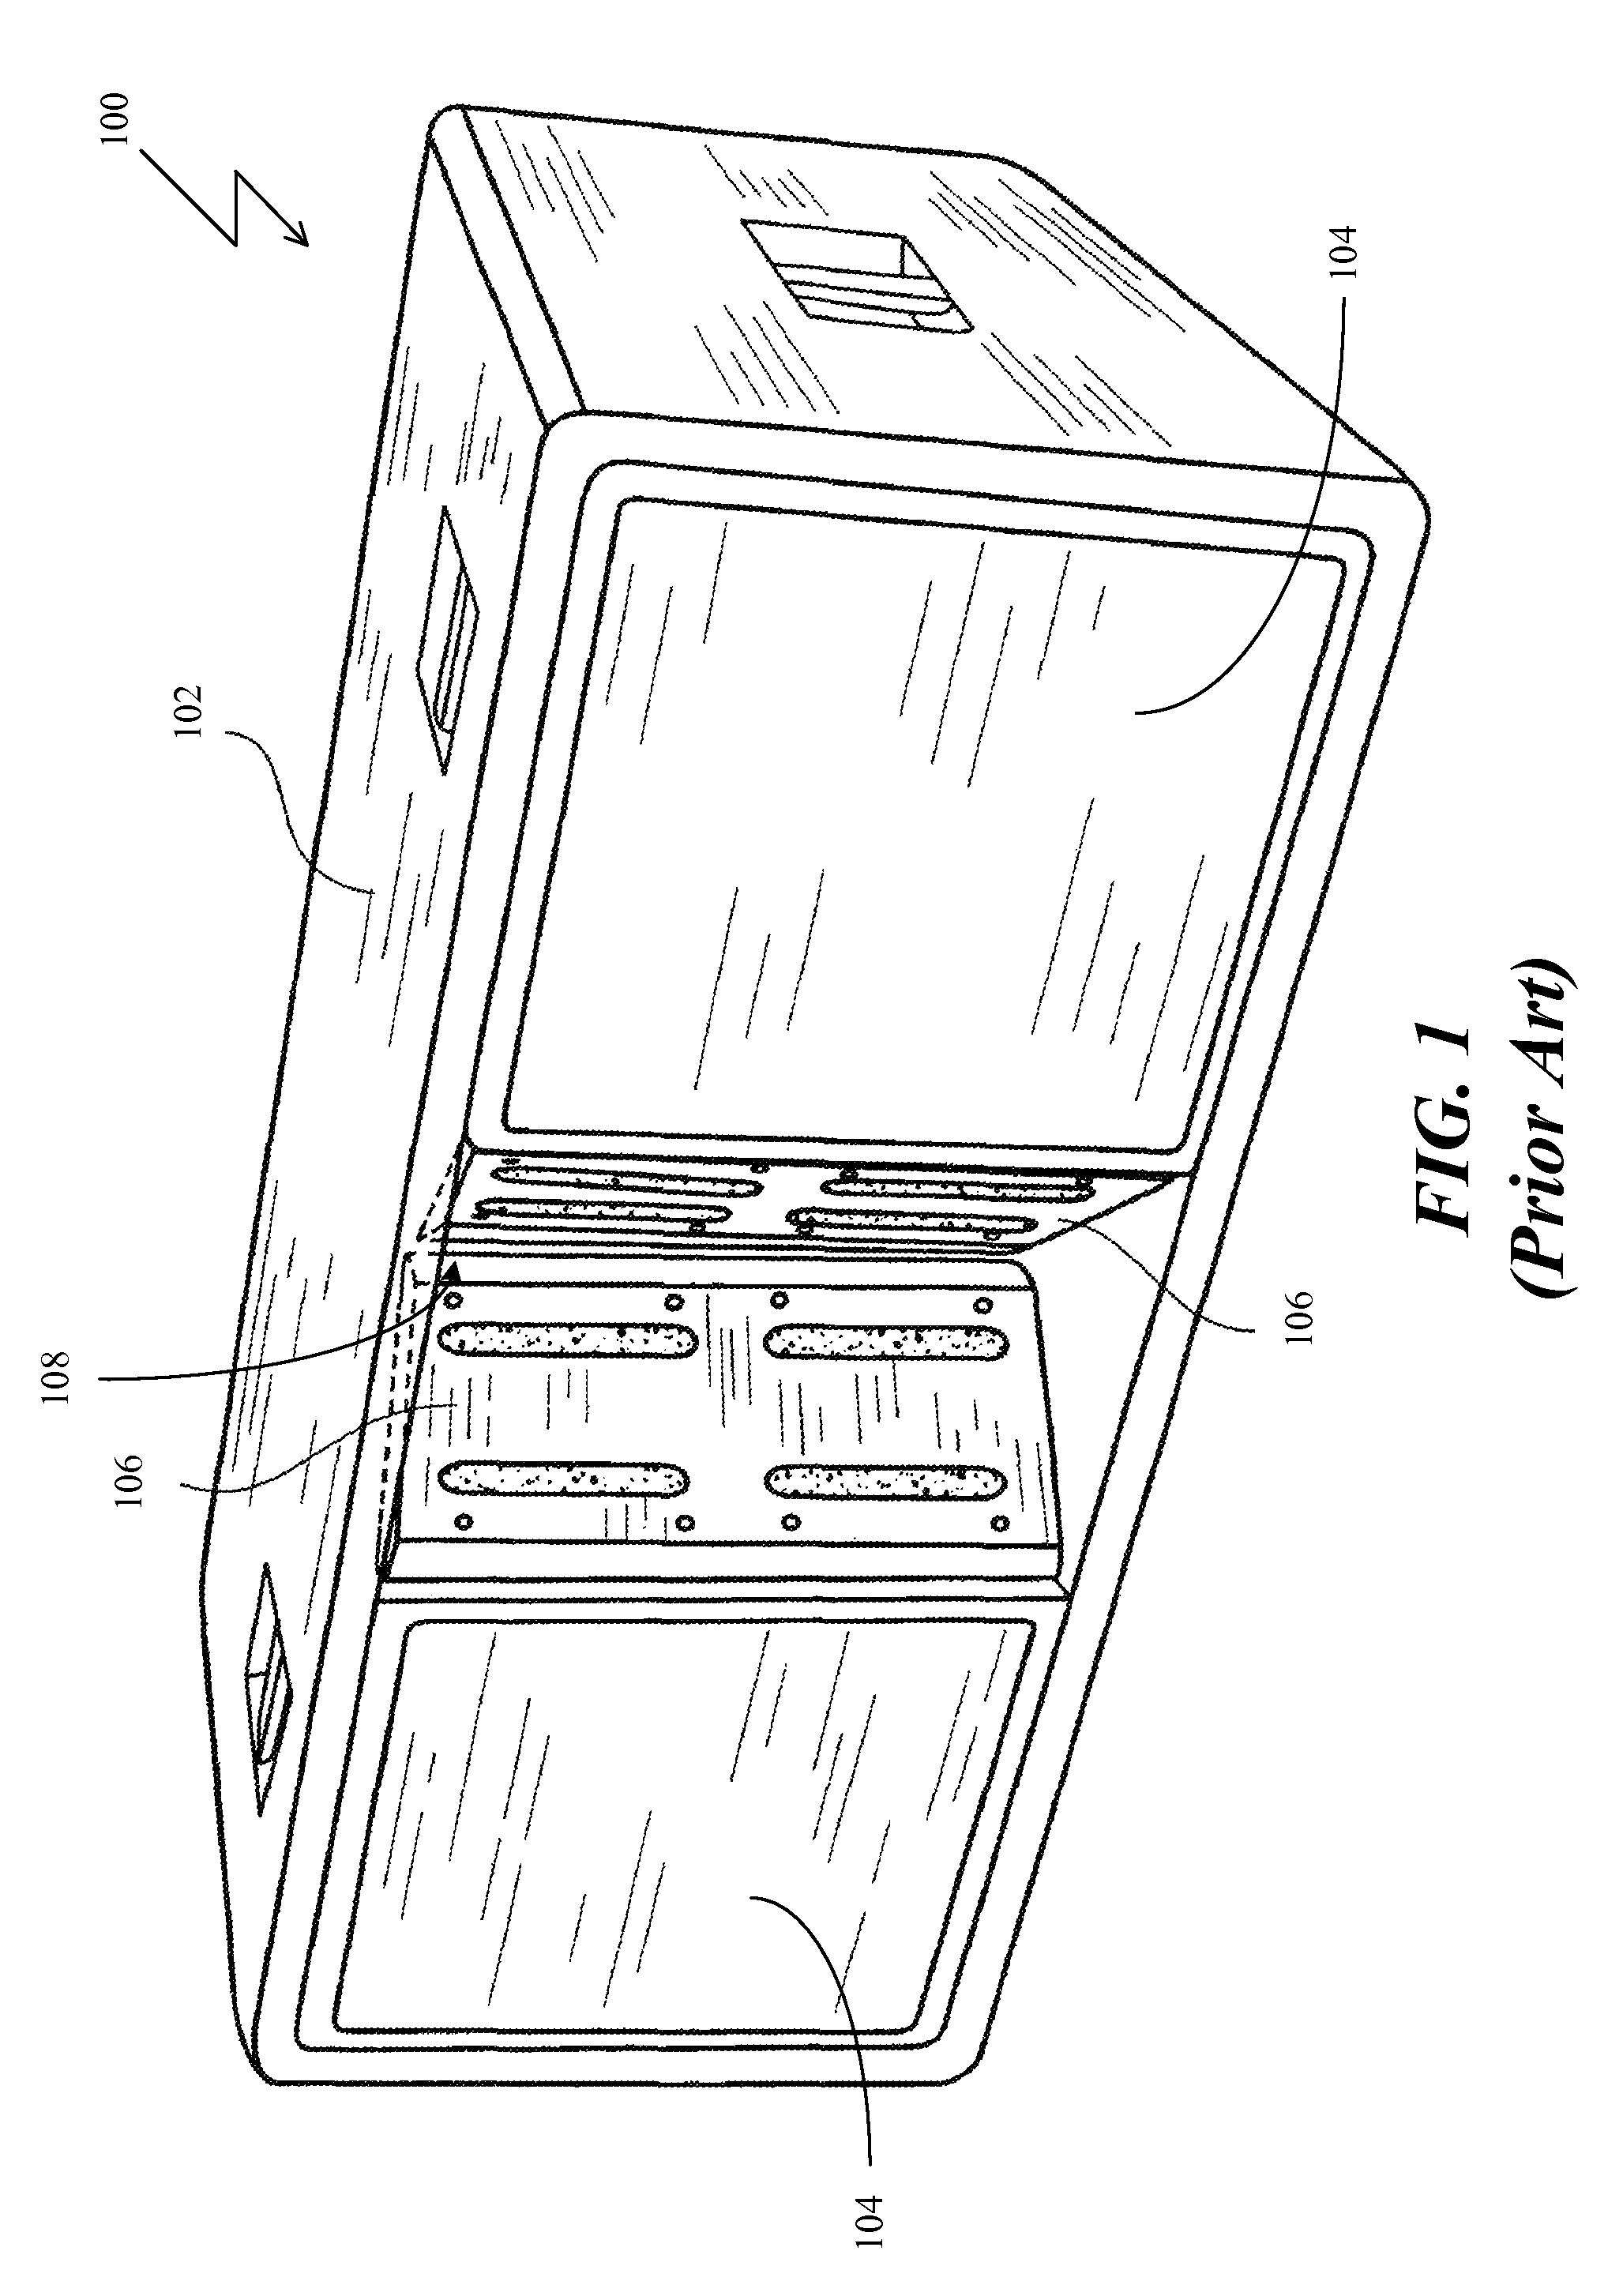 High frequency horn having a tuned resonant cavity